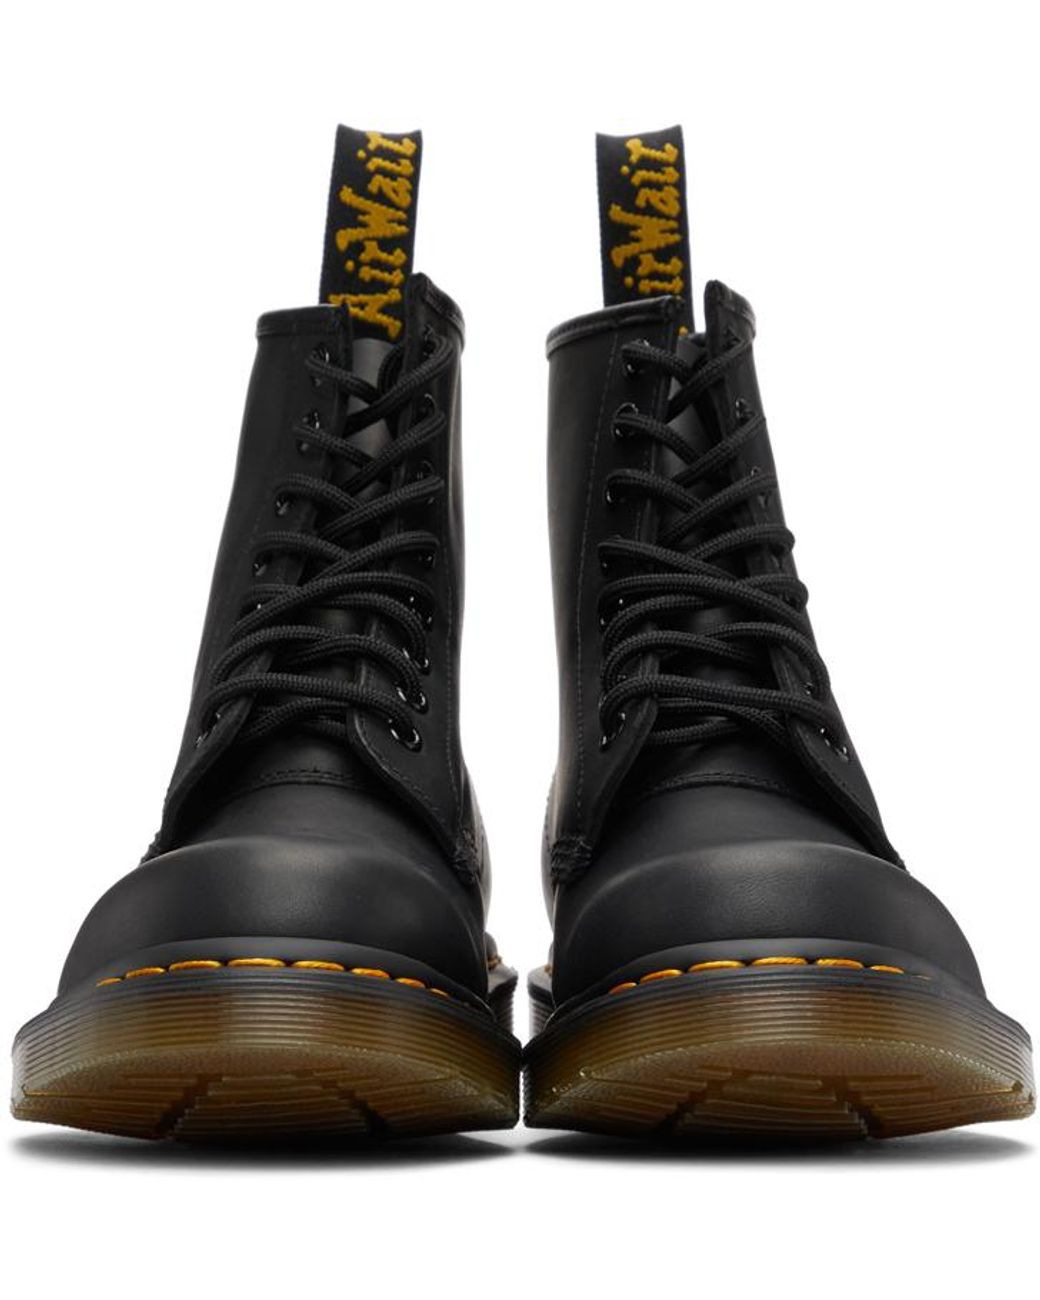 Dr. Martens Leather Greasy 1460 Boots in Black for Men - Lyst